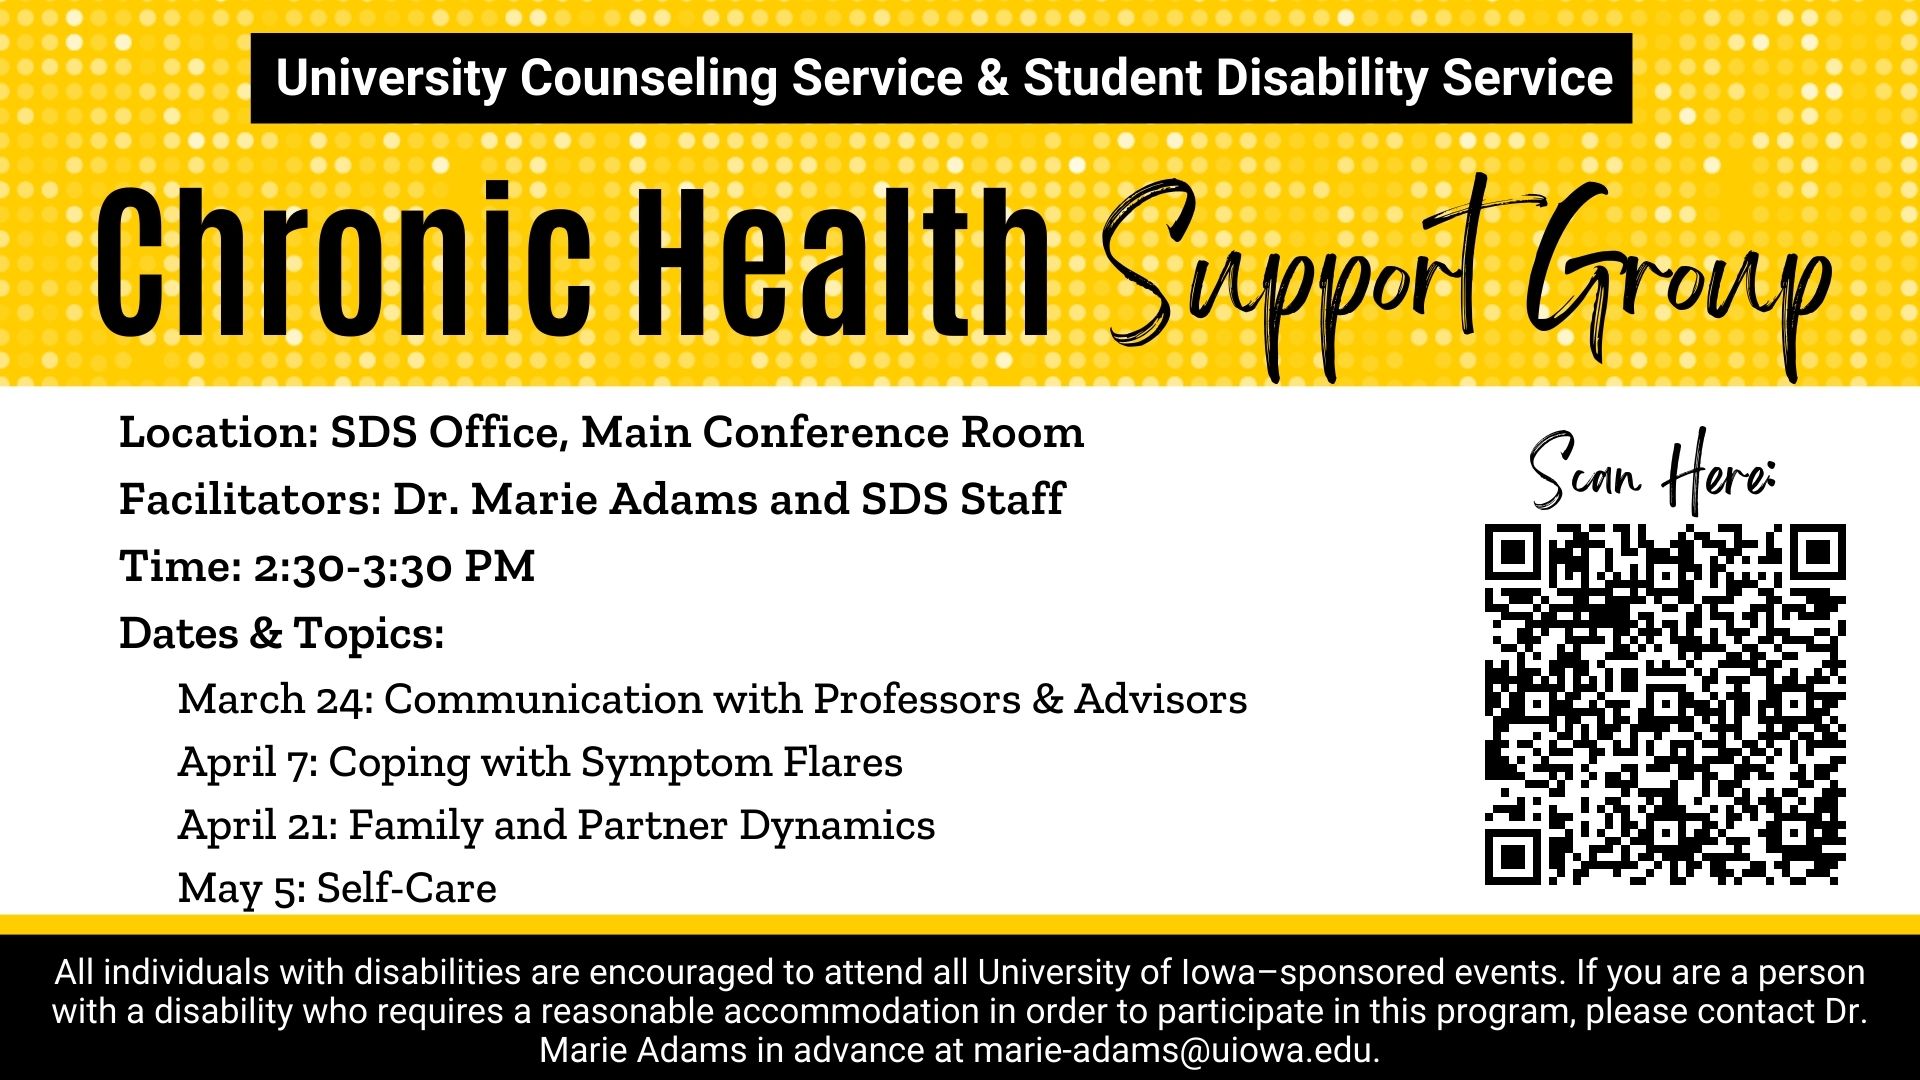  Location: SDS Office, Main Conference Room Facilitators: Dr. Marie Adams and SDS Staff Time: 2:30-3:30 PM Dates & Topics:       March 24: Communication with Professors & Advisors       April 7: Coping with Symptom Flares       April 21: Family and Partne